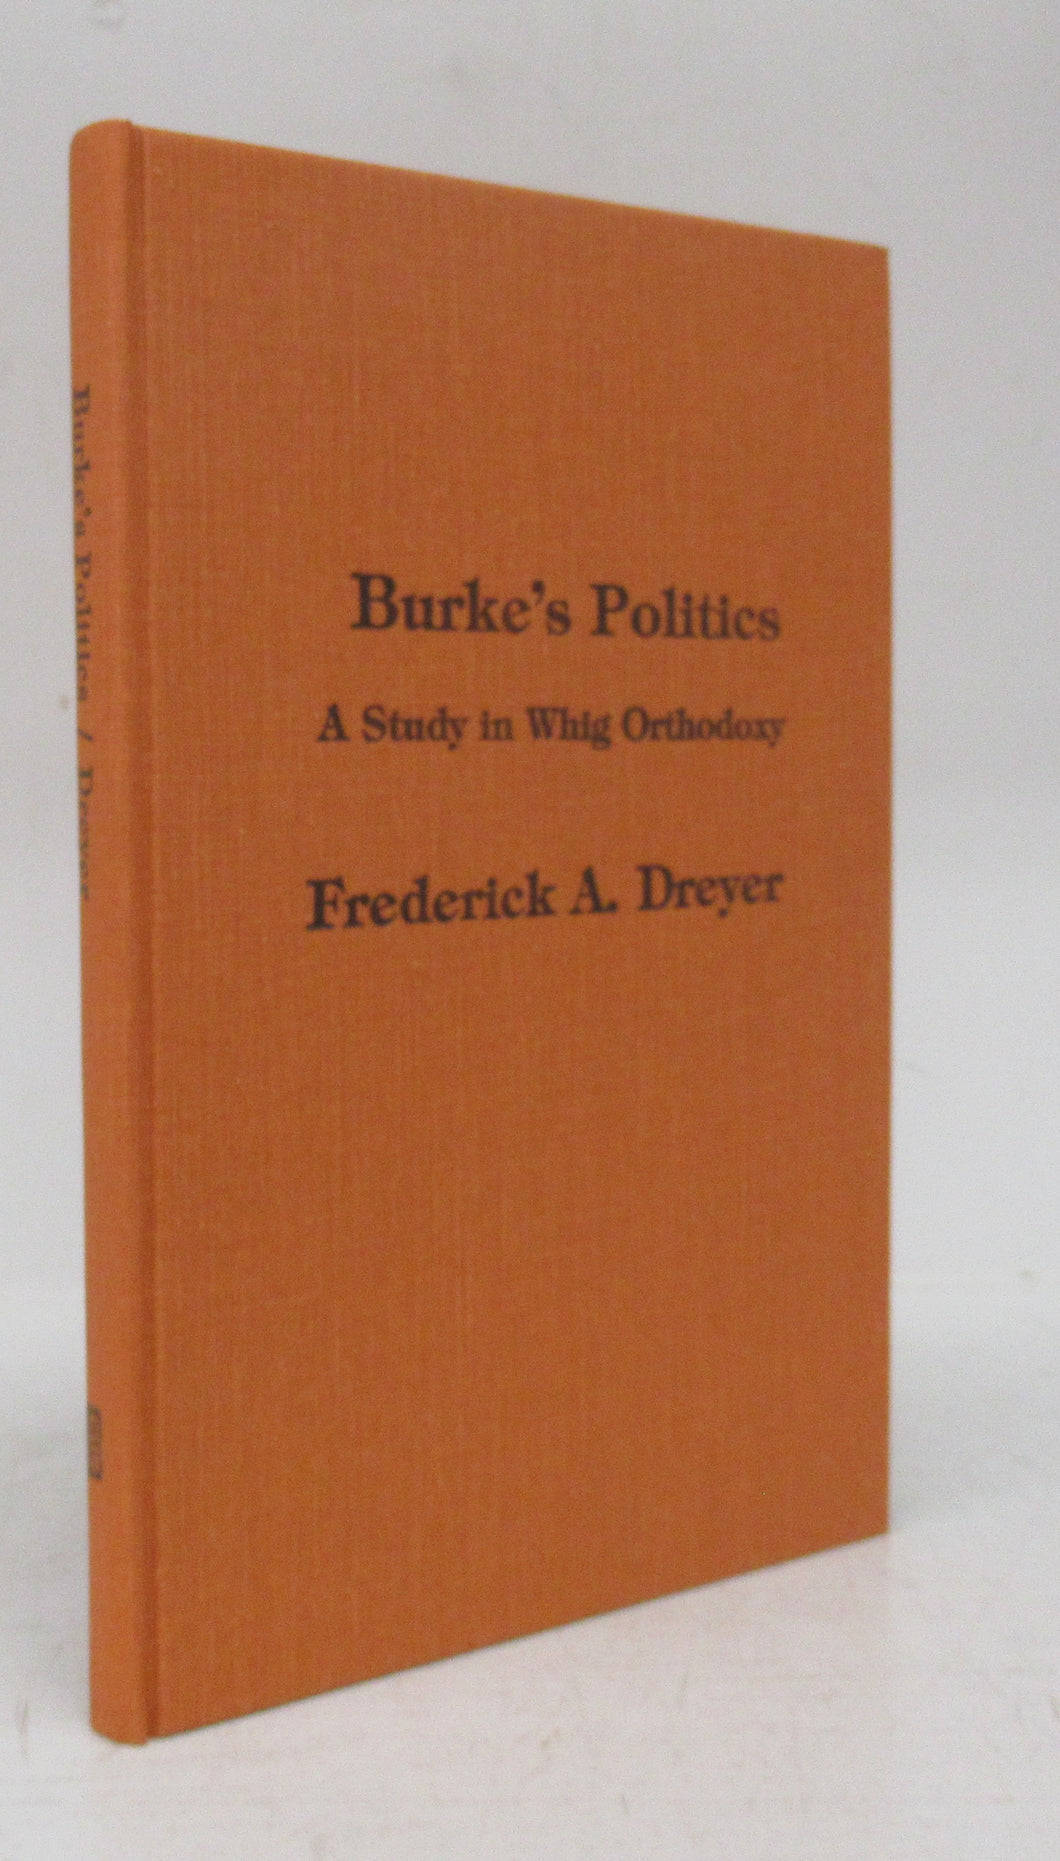 Burke's Politics: A Study in Whig Orthodoxy